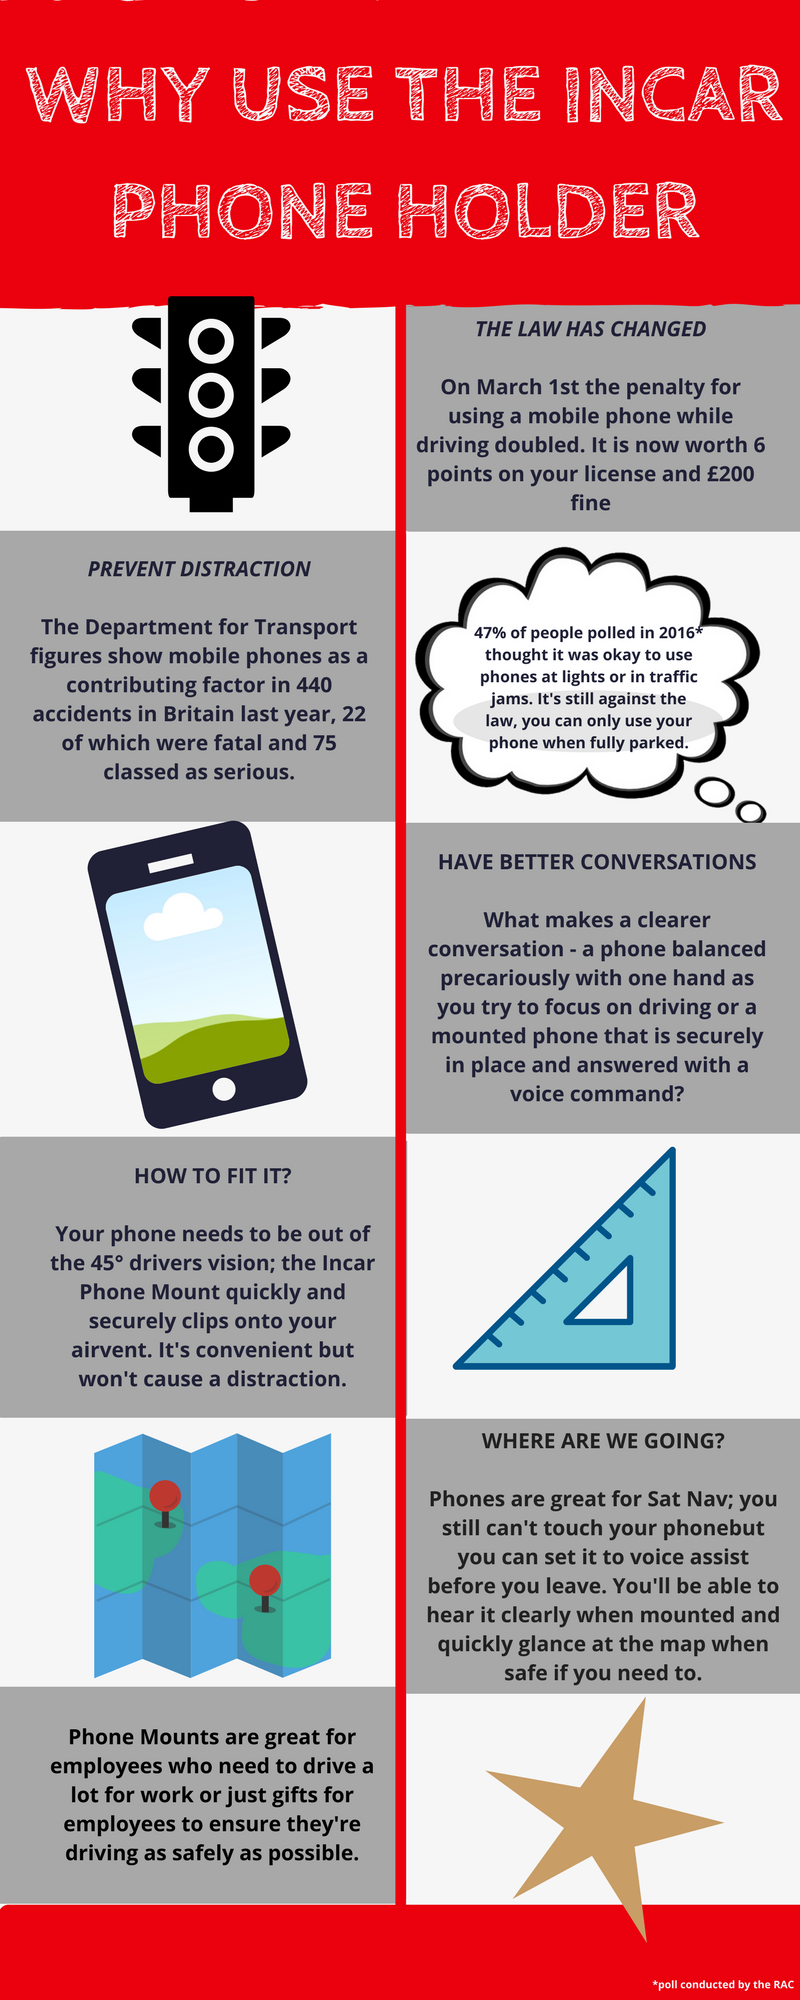 Infographic showing the benefits of using an Incar Phone Holder